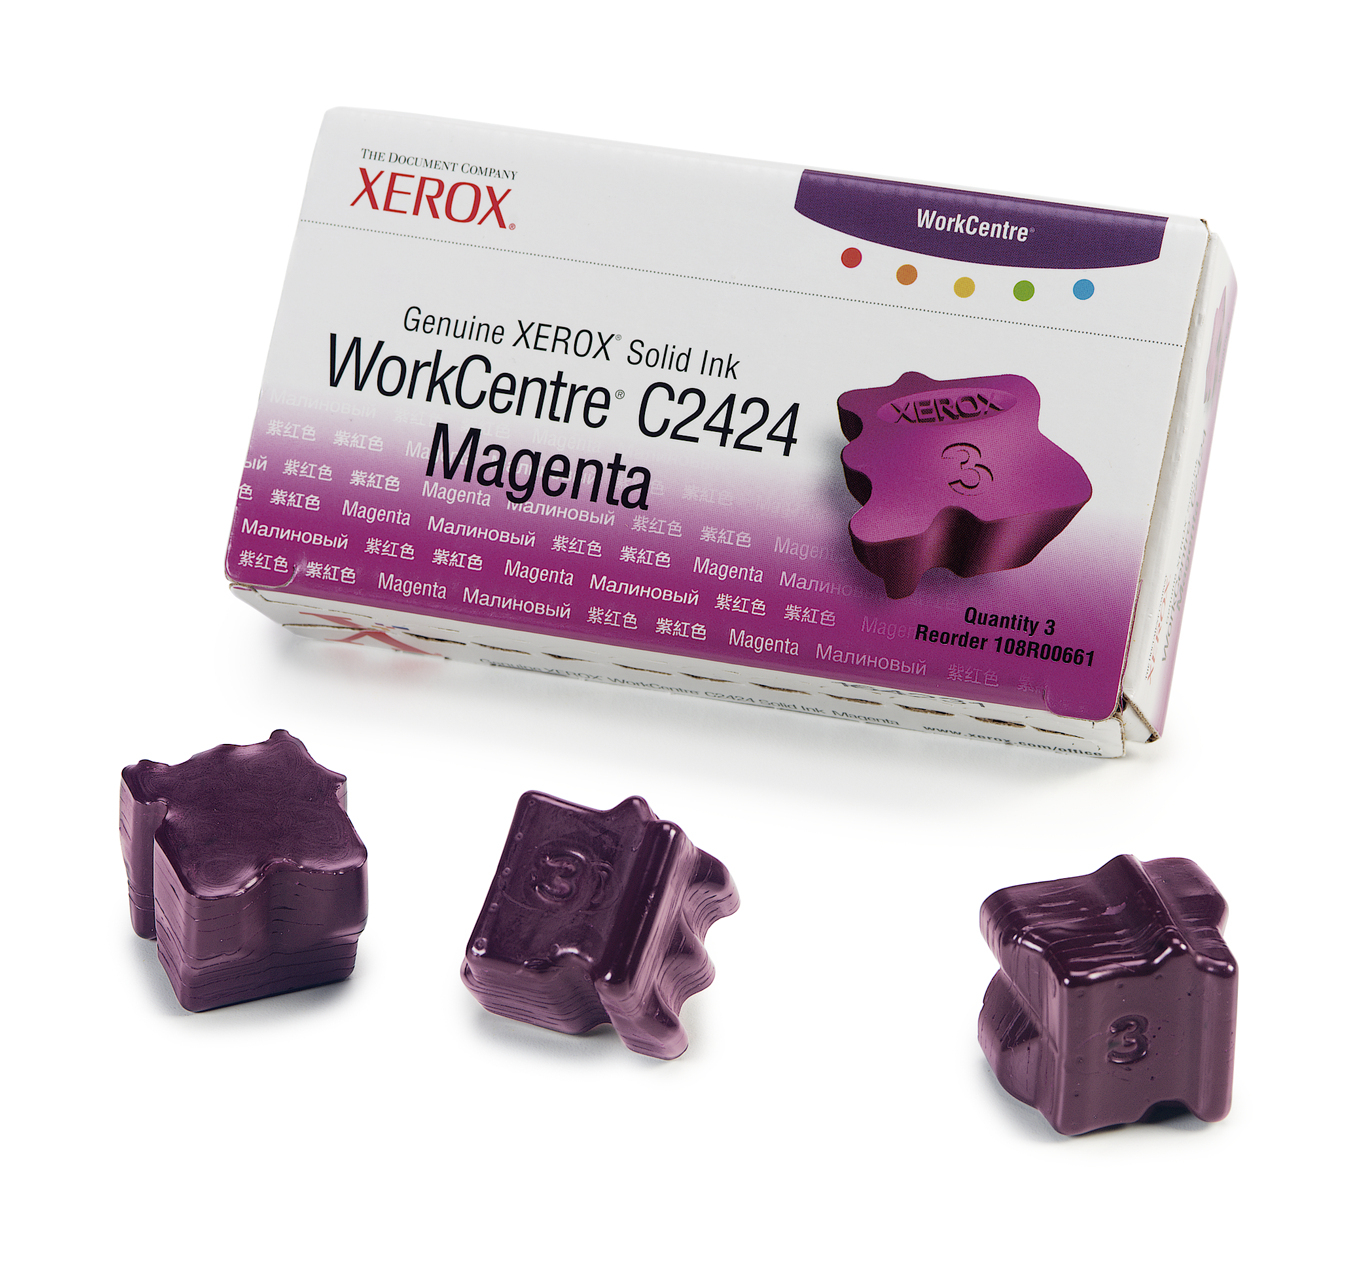 Xerox Solid Ink Magenta (3 sticks) for WorkCentre C2424